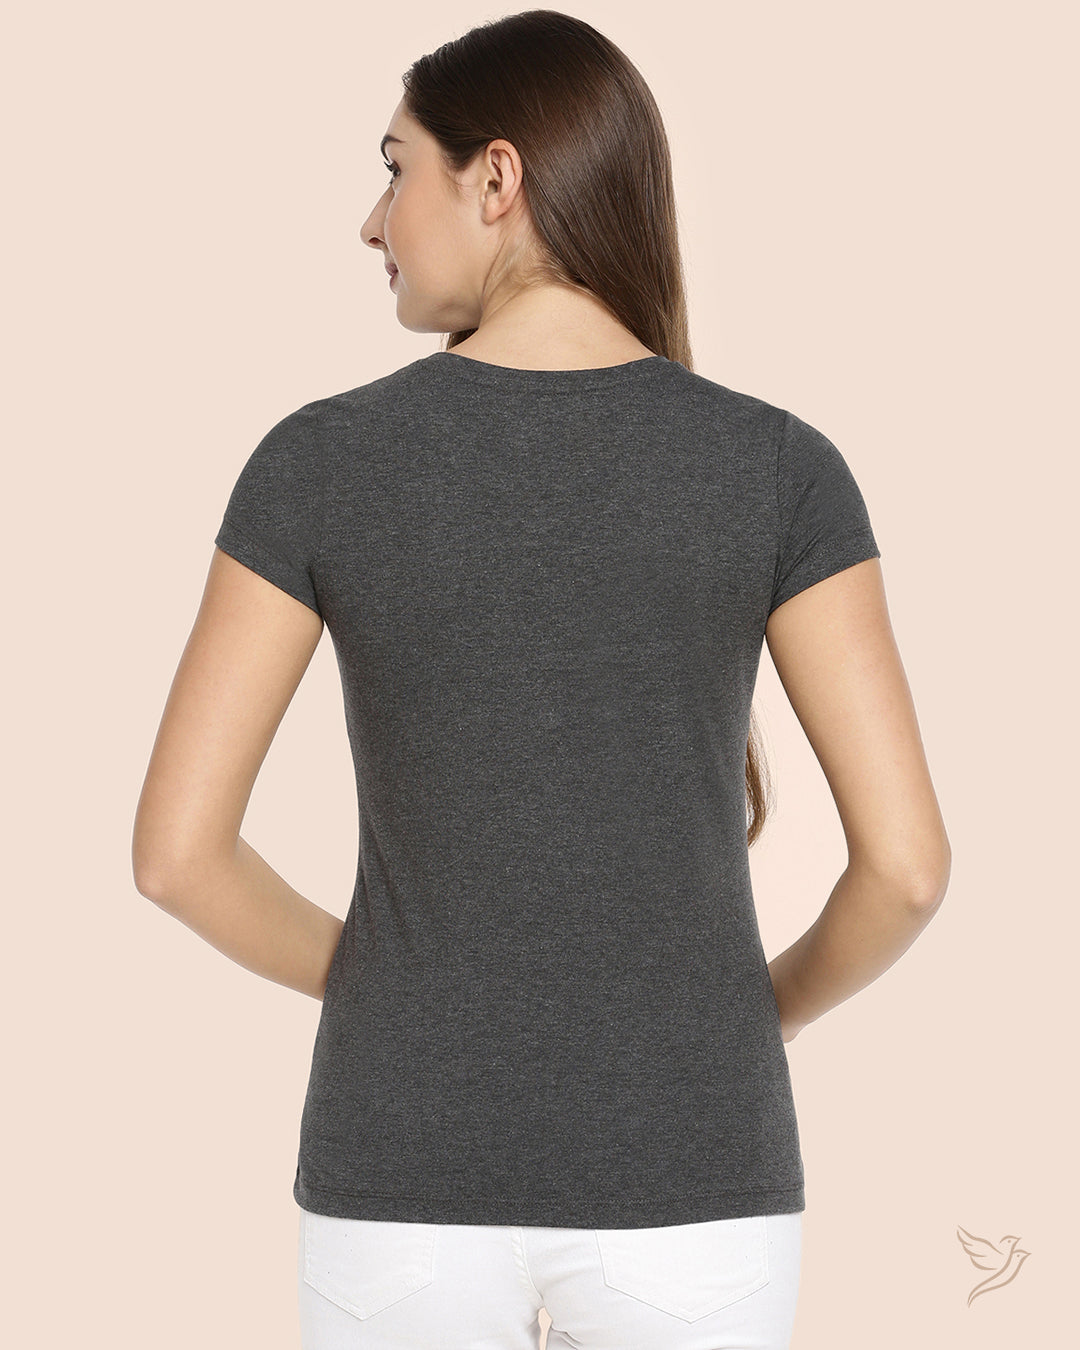 Charcoal Mix Slim Fit Signature Tee for College Girls